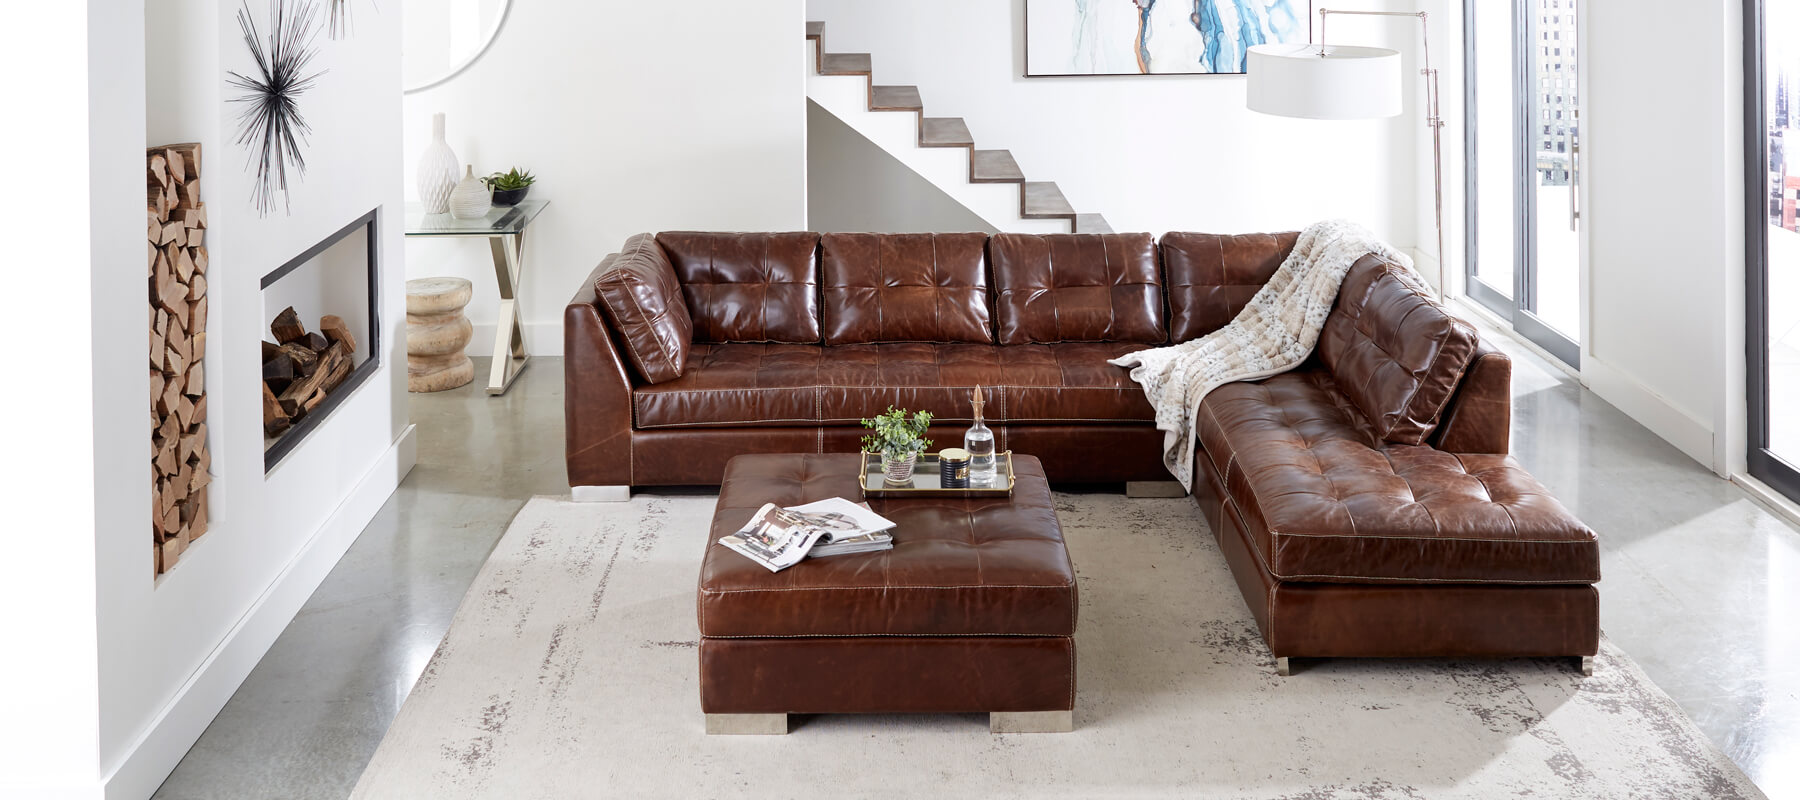 Brown leather sectional from Hayek's Leather Furniture